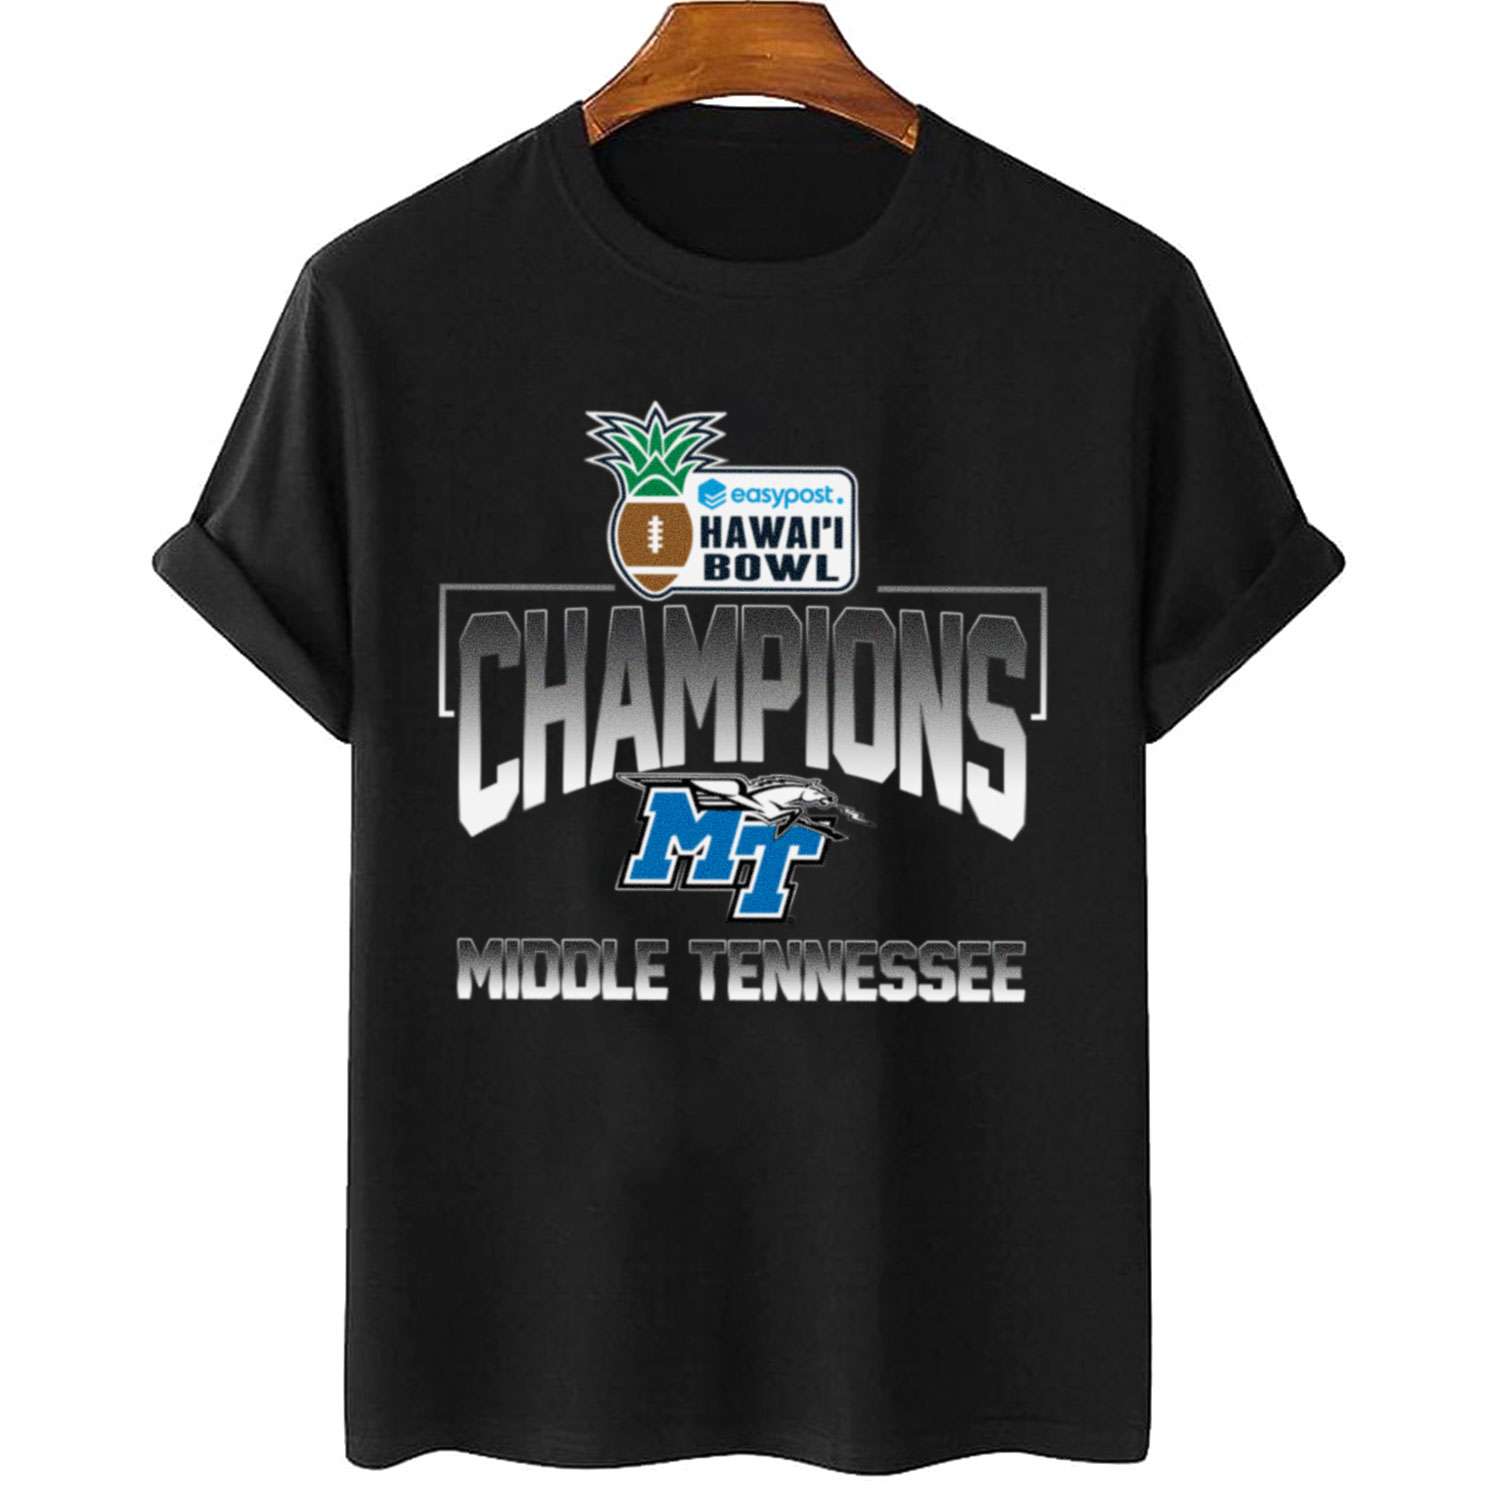 Middle Tennessee Hawaii bowl Champions T-Shirt